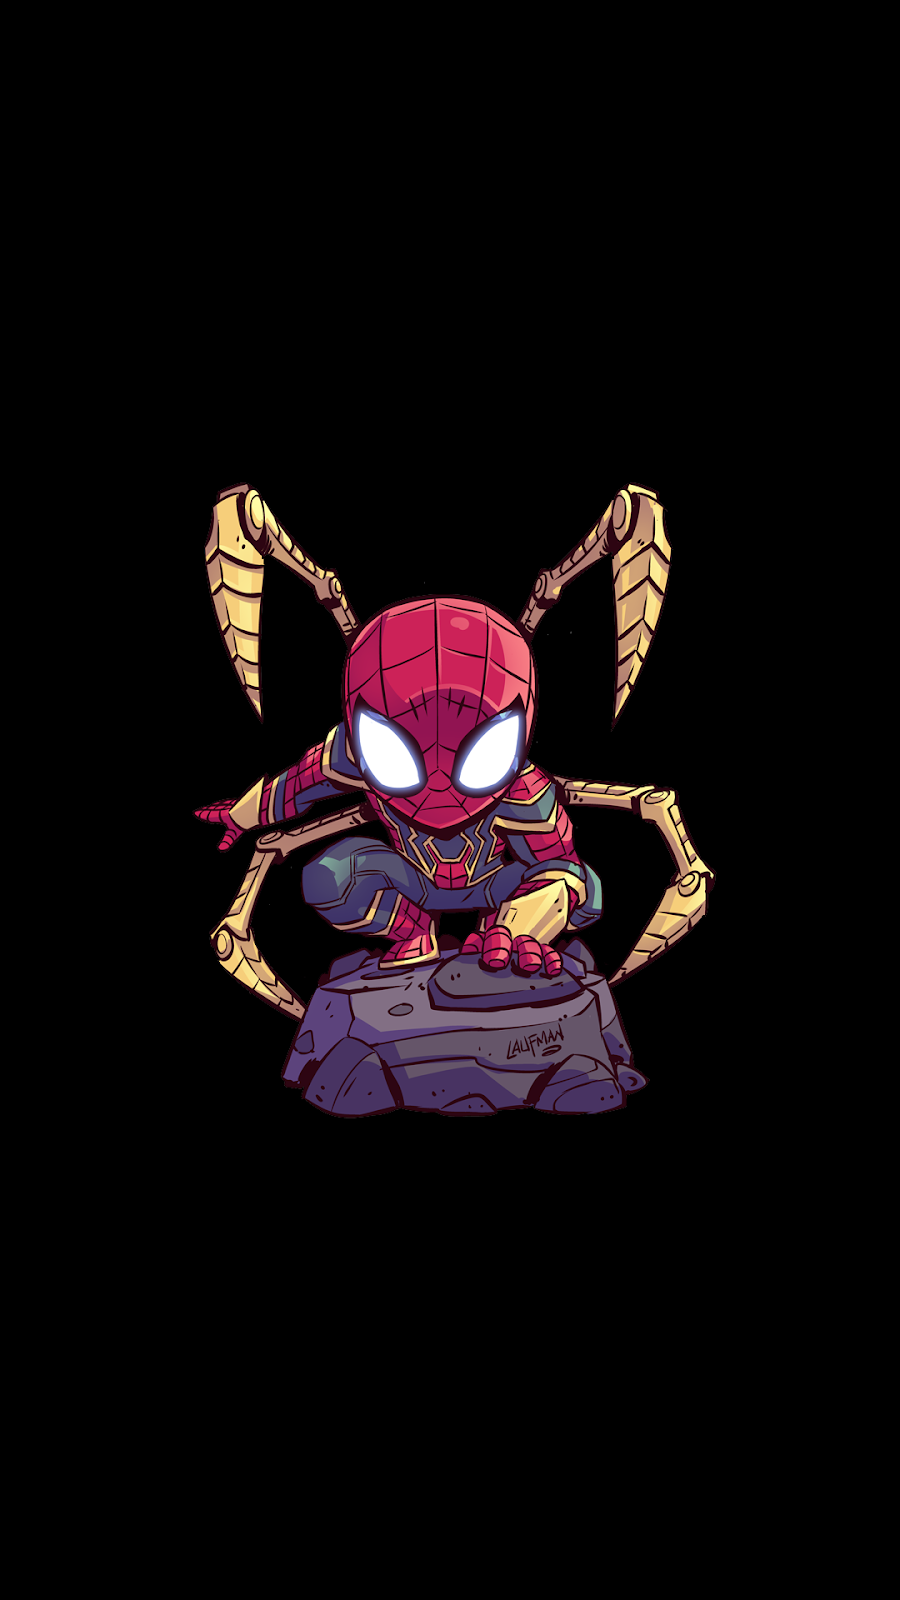 Click to view this amazing amoled wallpaper in original size. Check our site, you`ll like!. Marvel phone wallpaper, Marvel comics wallpaper, Superhero wallpaper